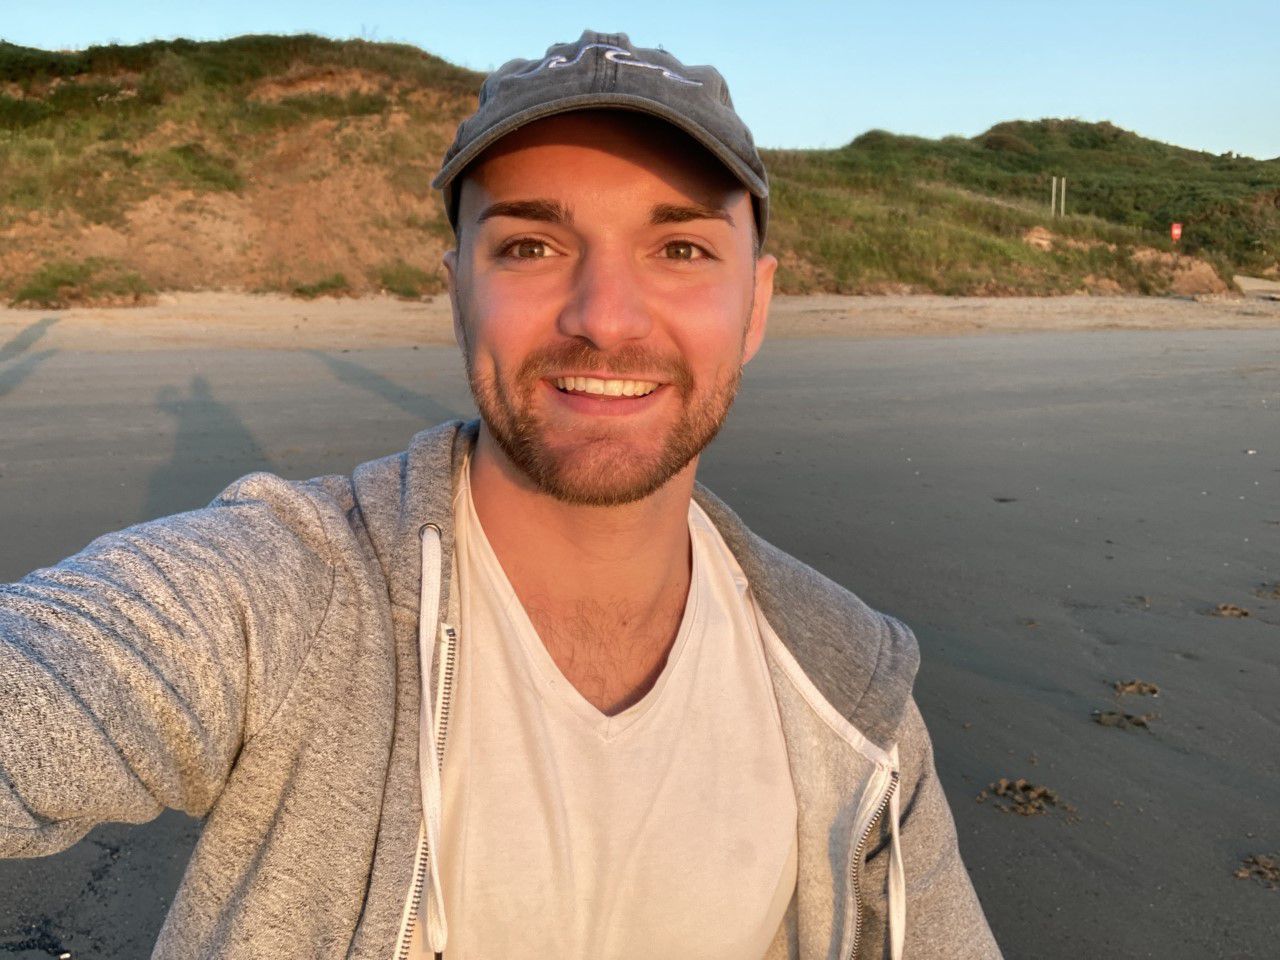 Photo of James on a walk, smiling at the camera in a cap